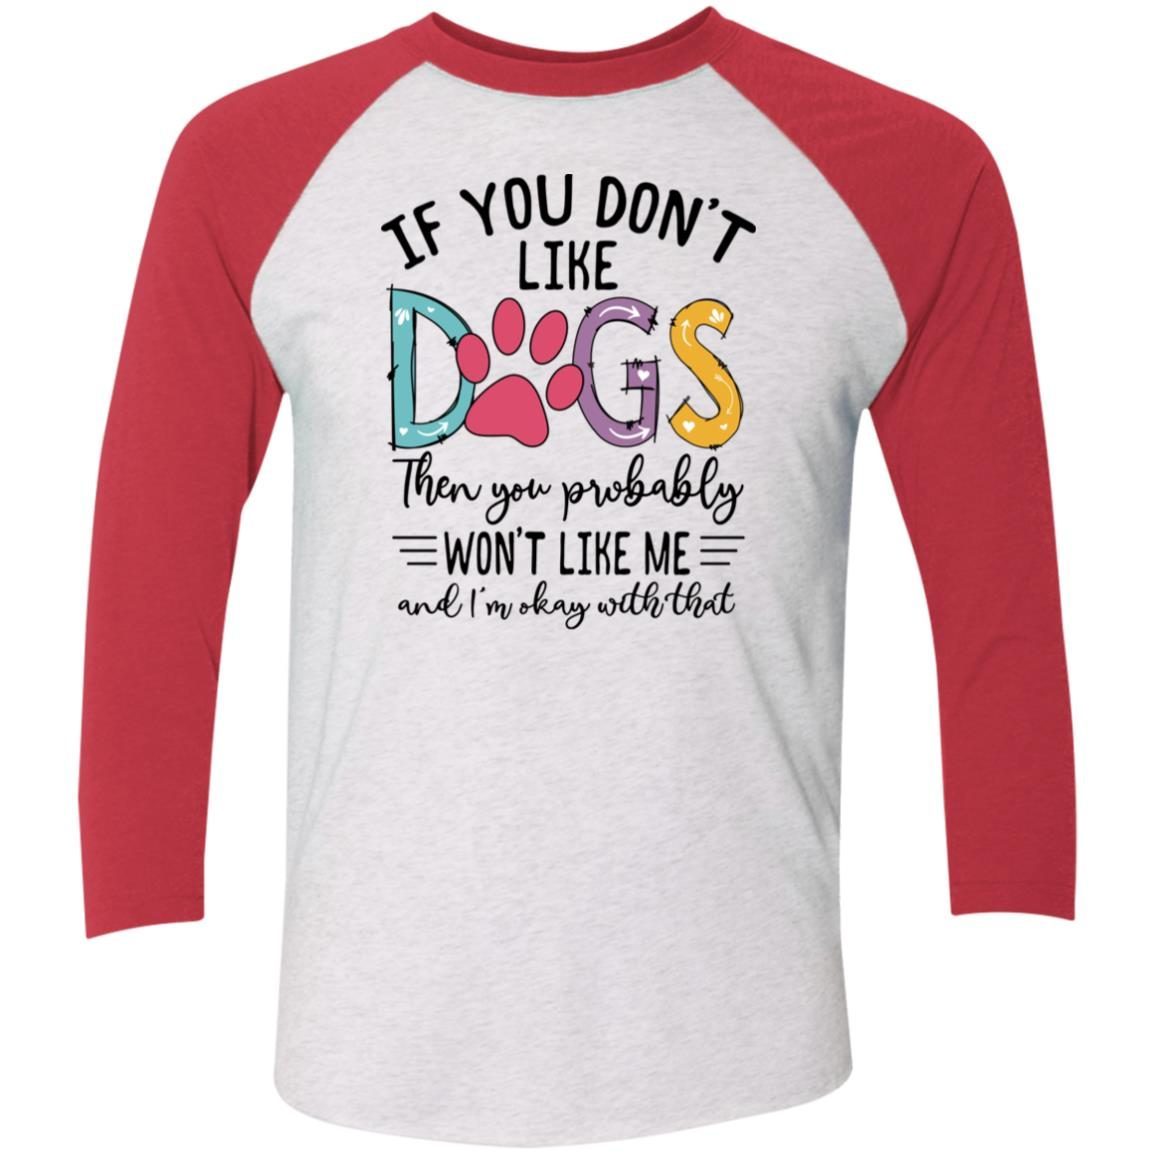 If You Don’t Like Dogs Then You Probably Won’t Like Me shirt 8